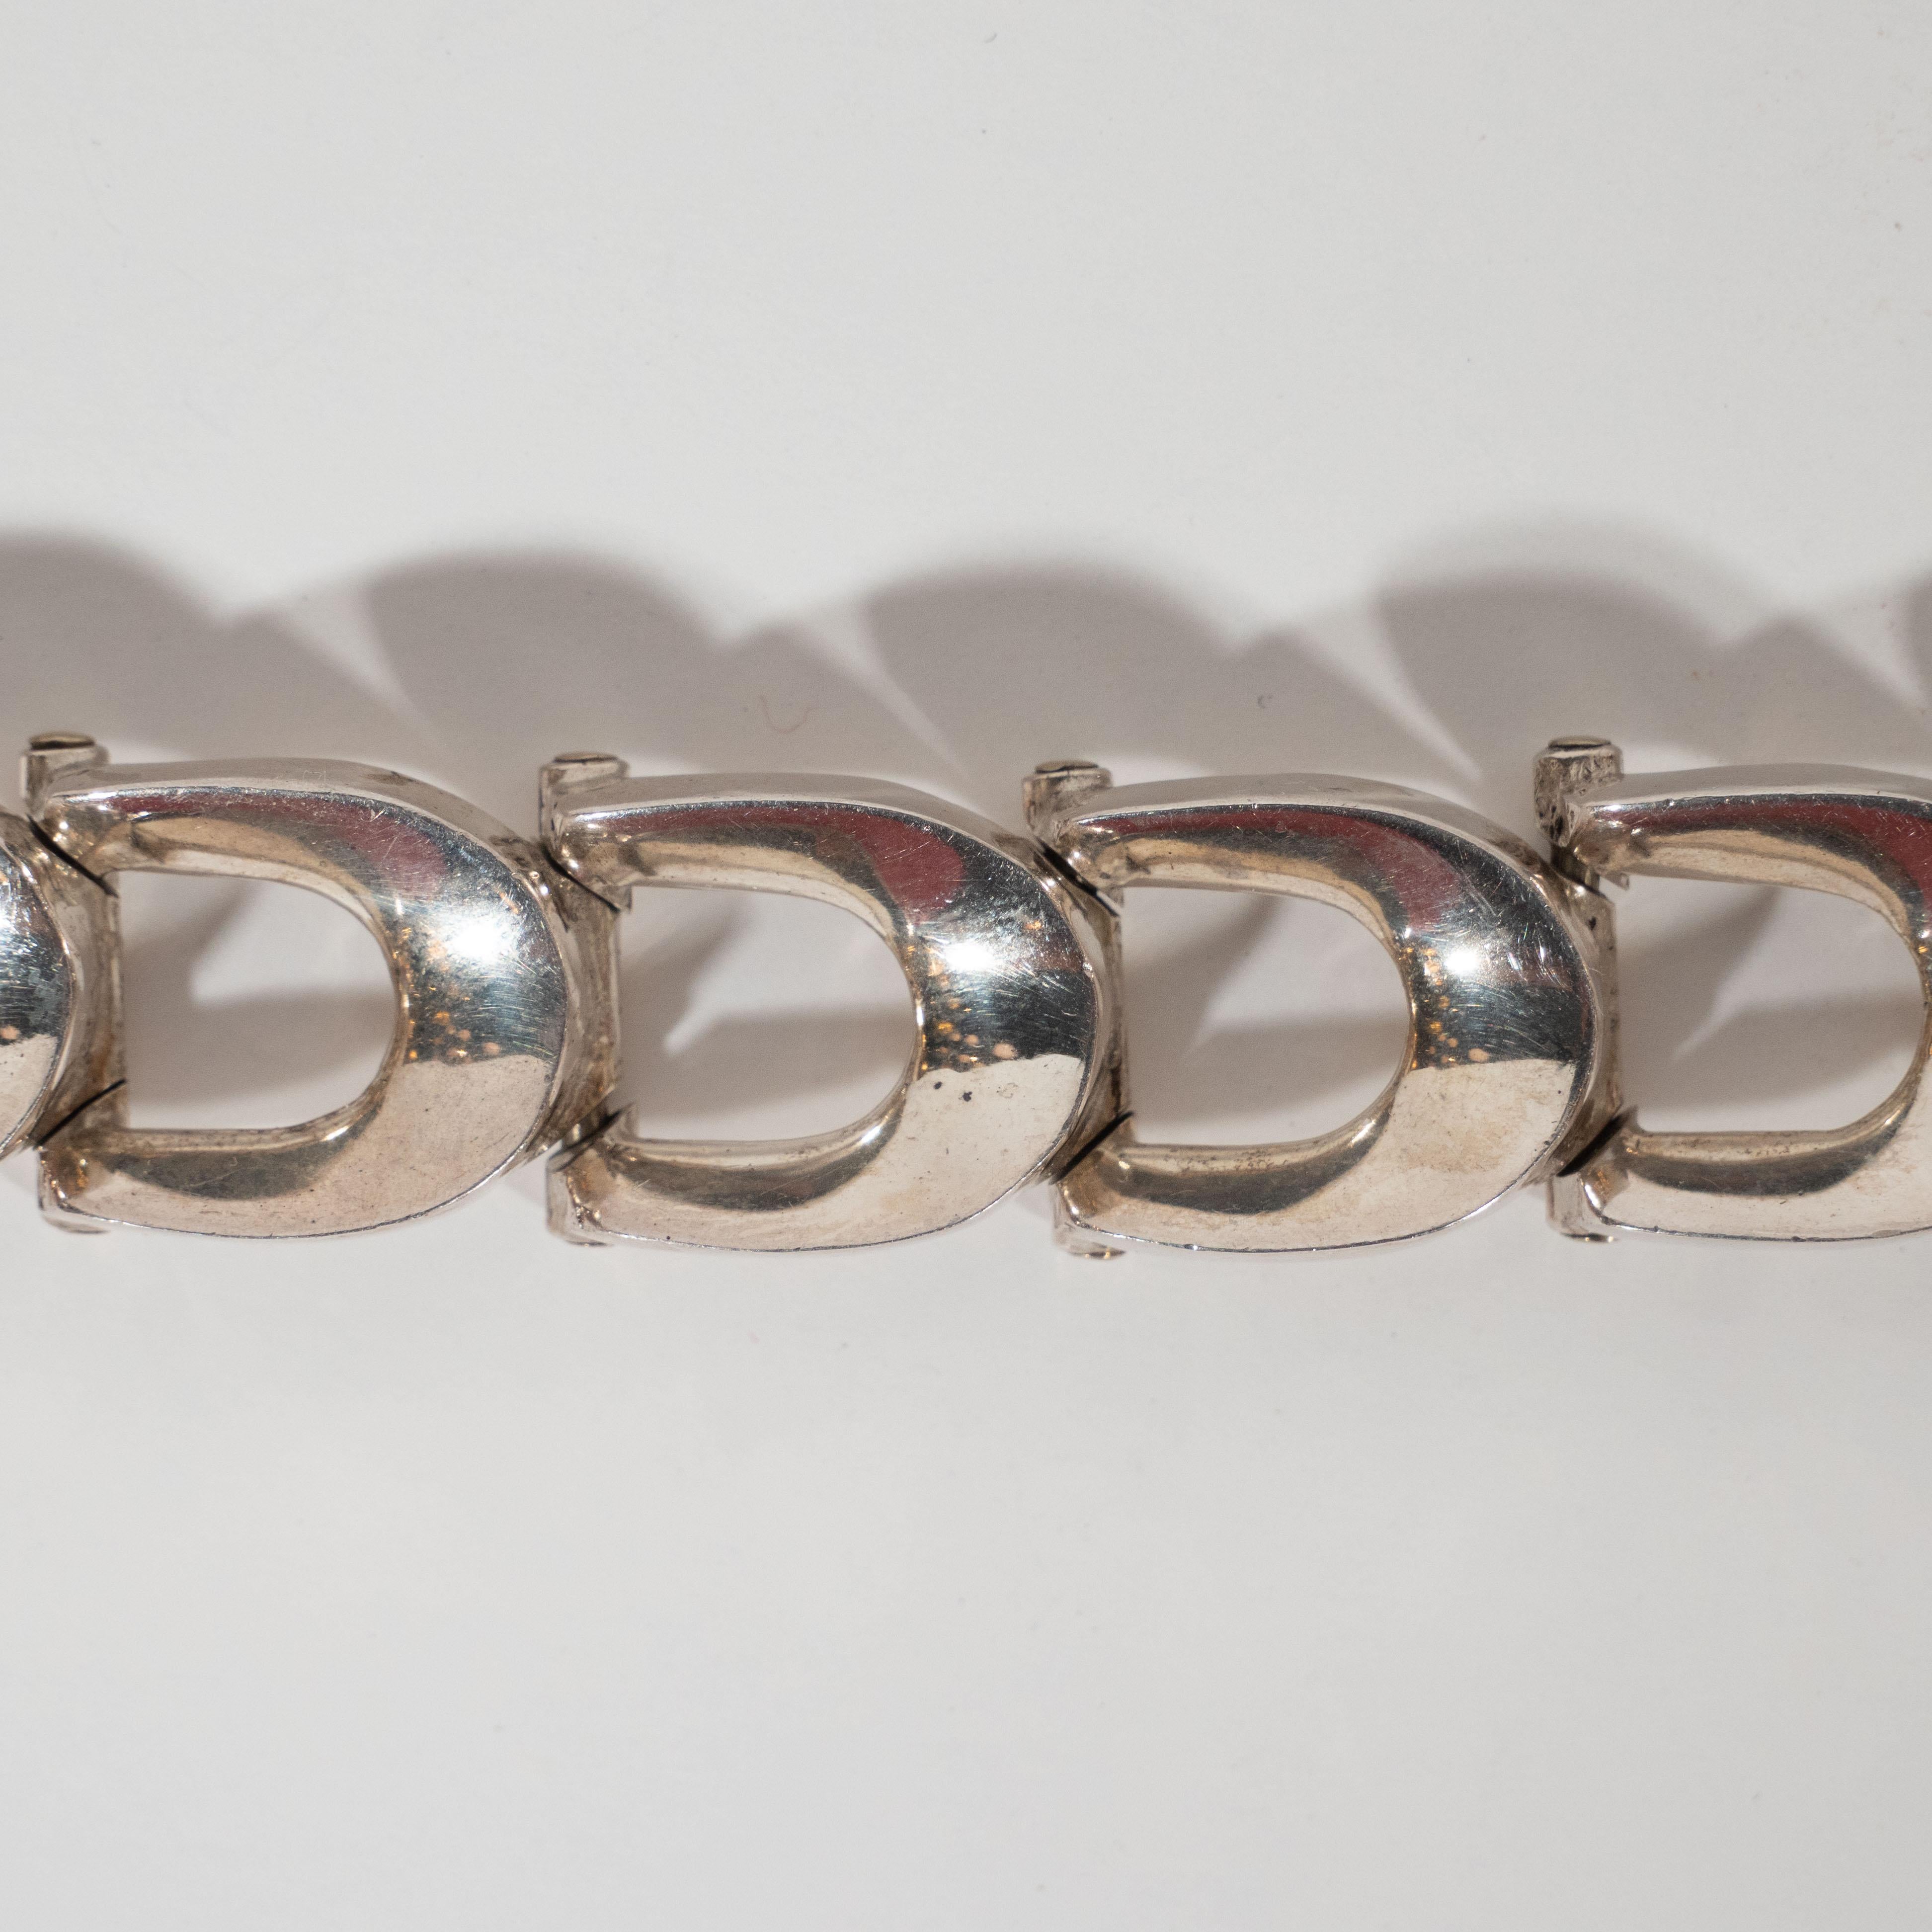 This refined sterling silver bracelet was realized in the United States, circa 1930. It features ten U-form sterling silver links whose streamlined shape epitomizes the period's fascination with speed (air travel, automobiles etc.). With its